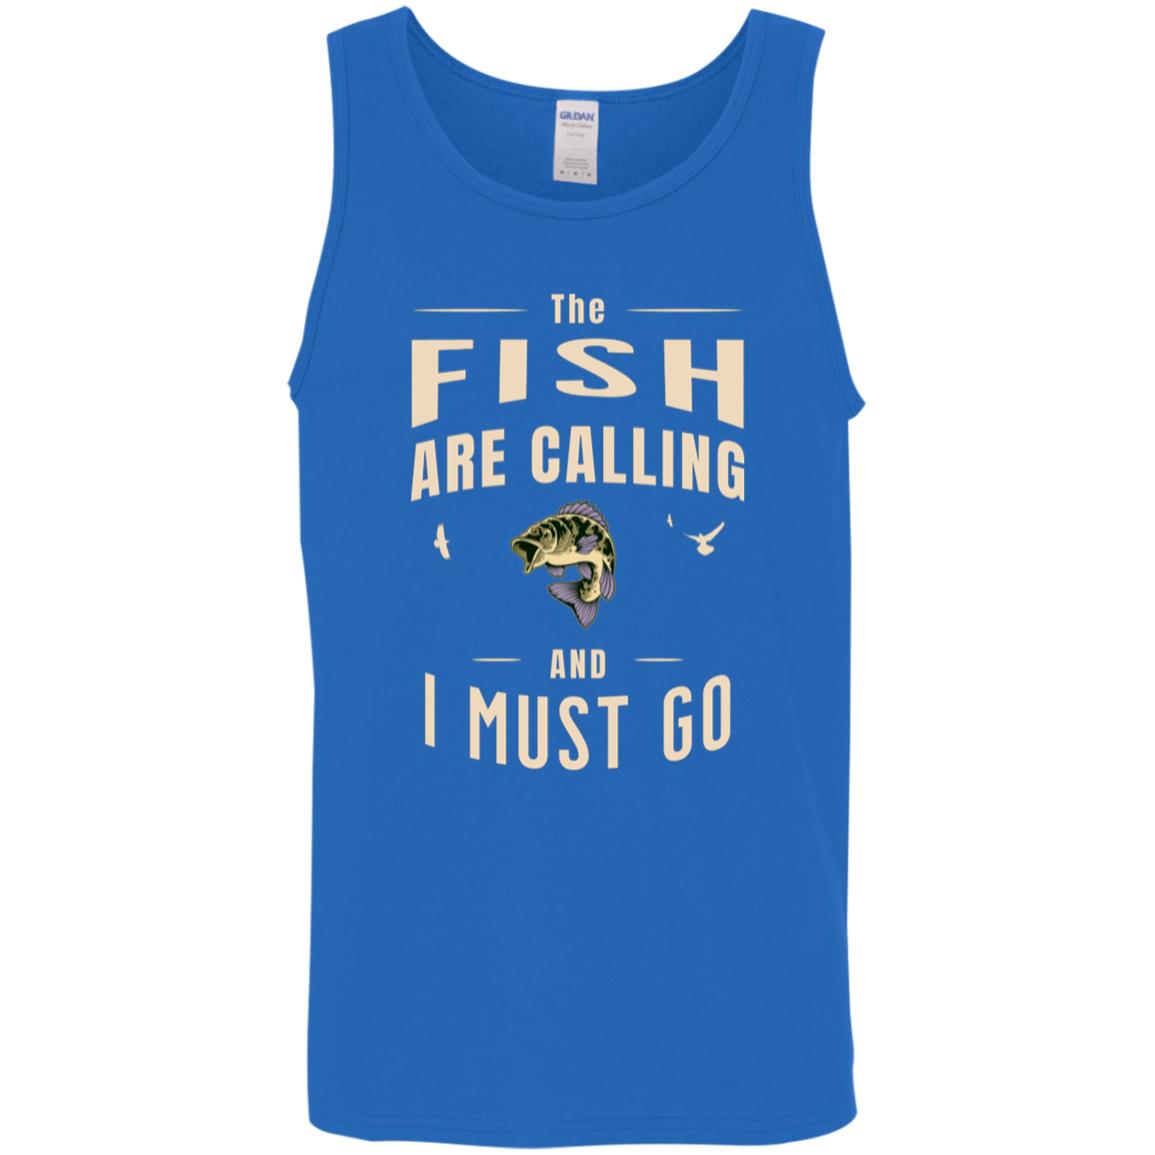 The fish are calling and I must go tank top k royal